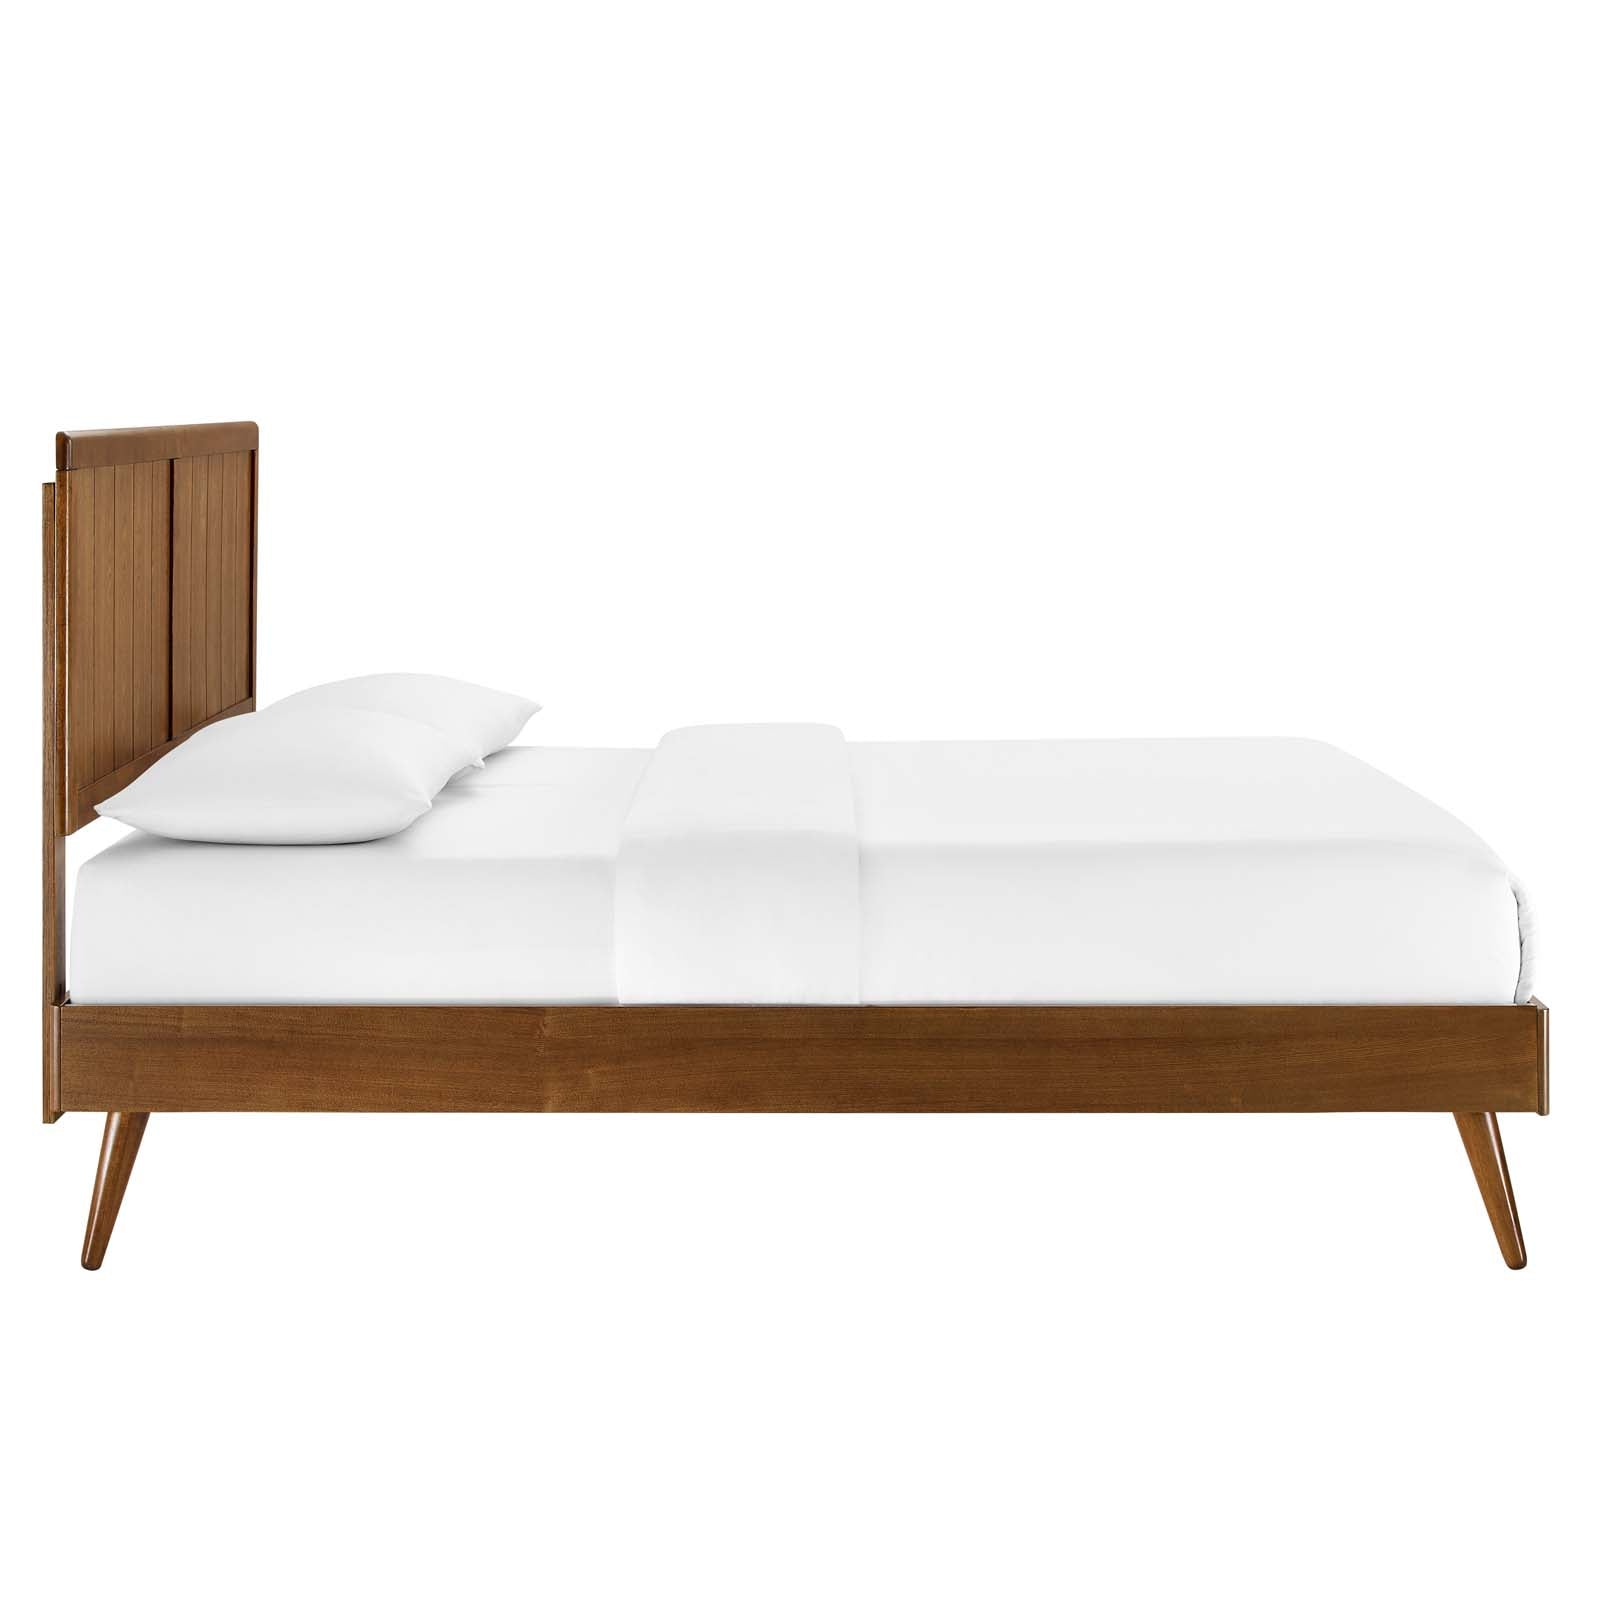 Alana Wood Platform Bed With Splayed Legs - East Shore Modern Home Furnishings